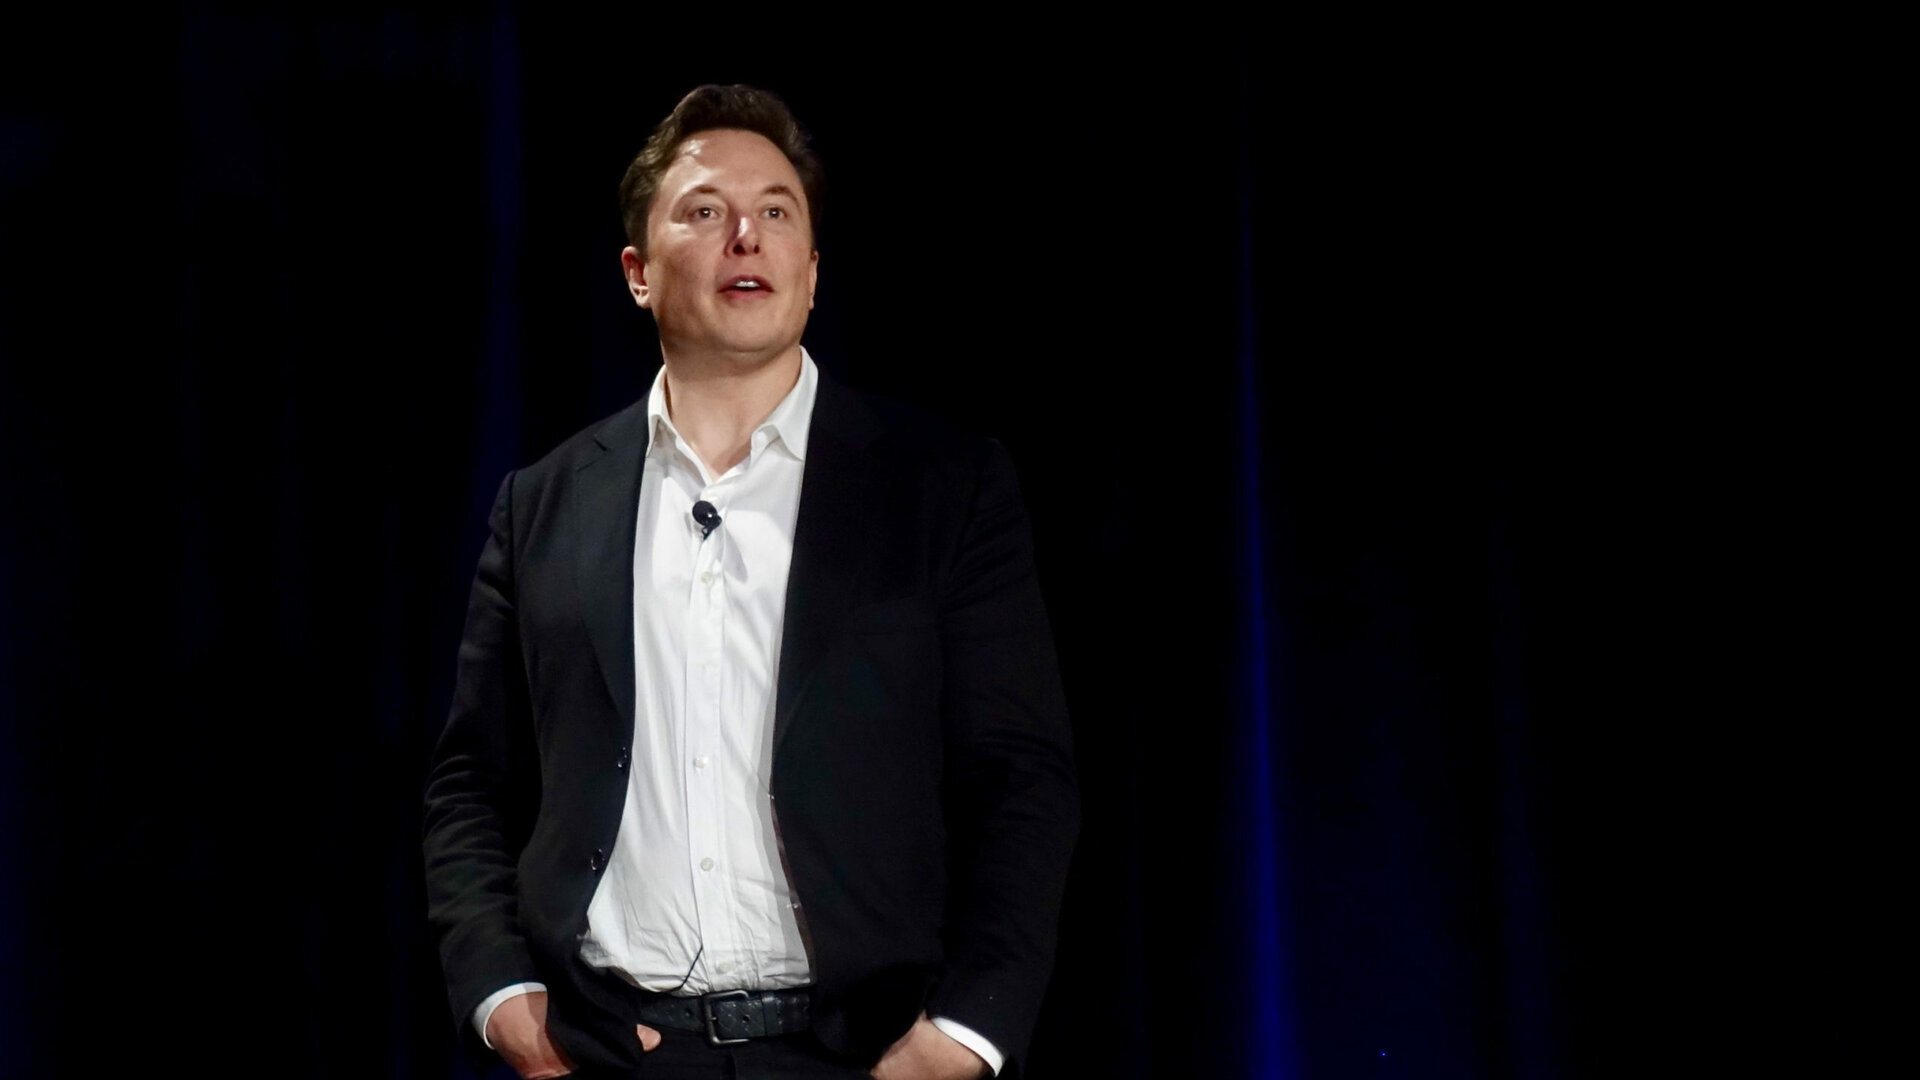 Elon Musk wants to create the everything app.